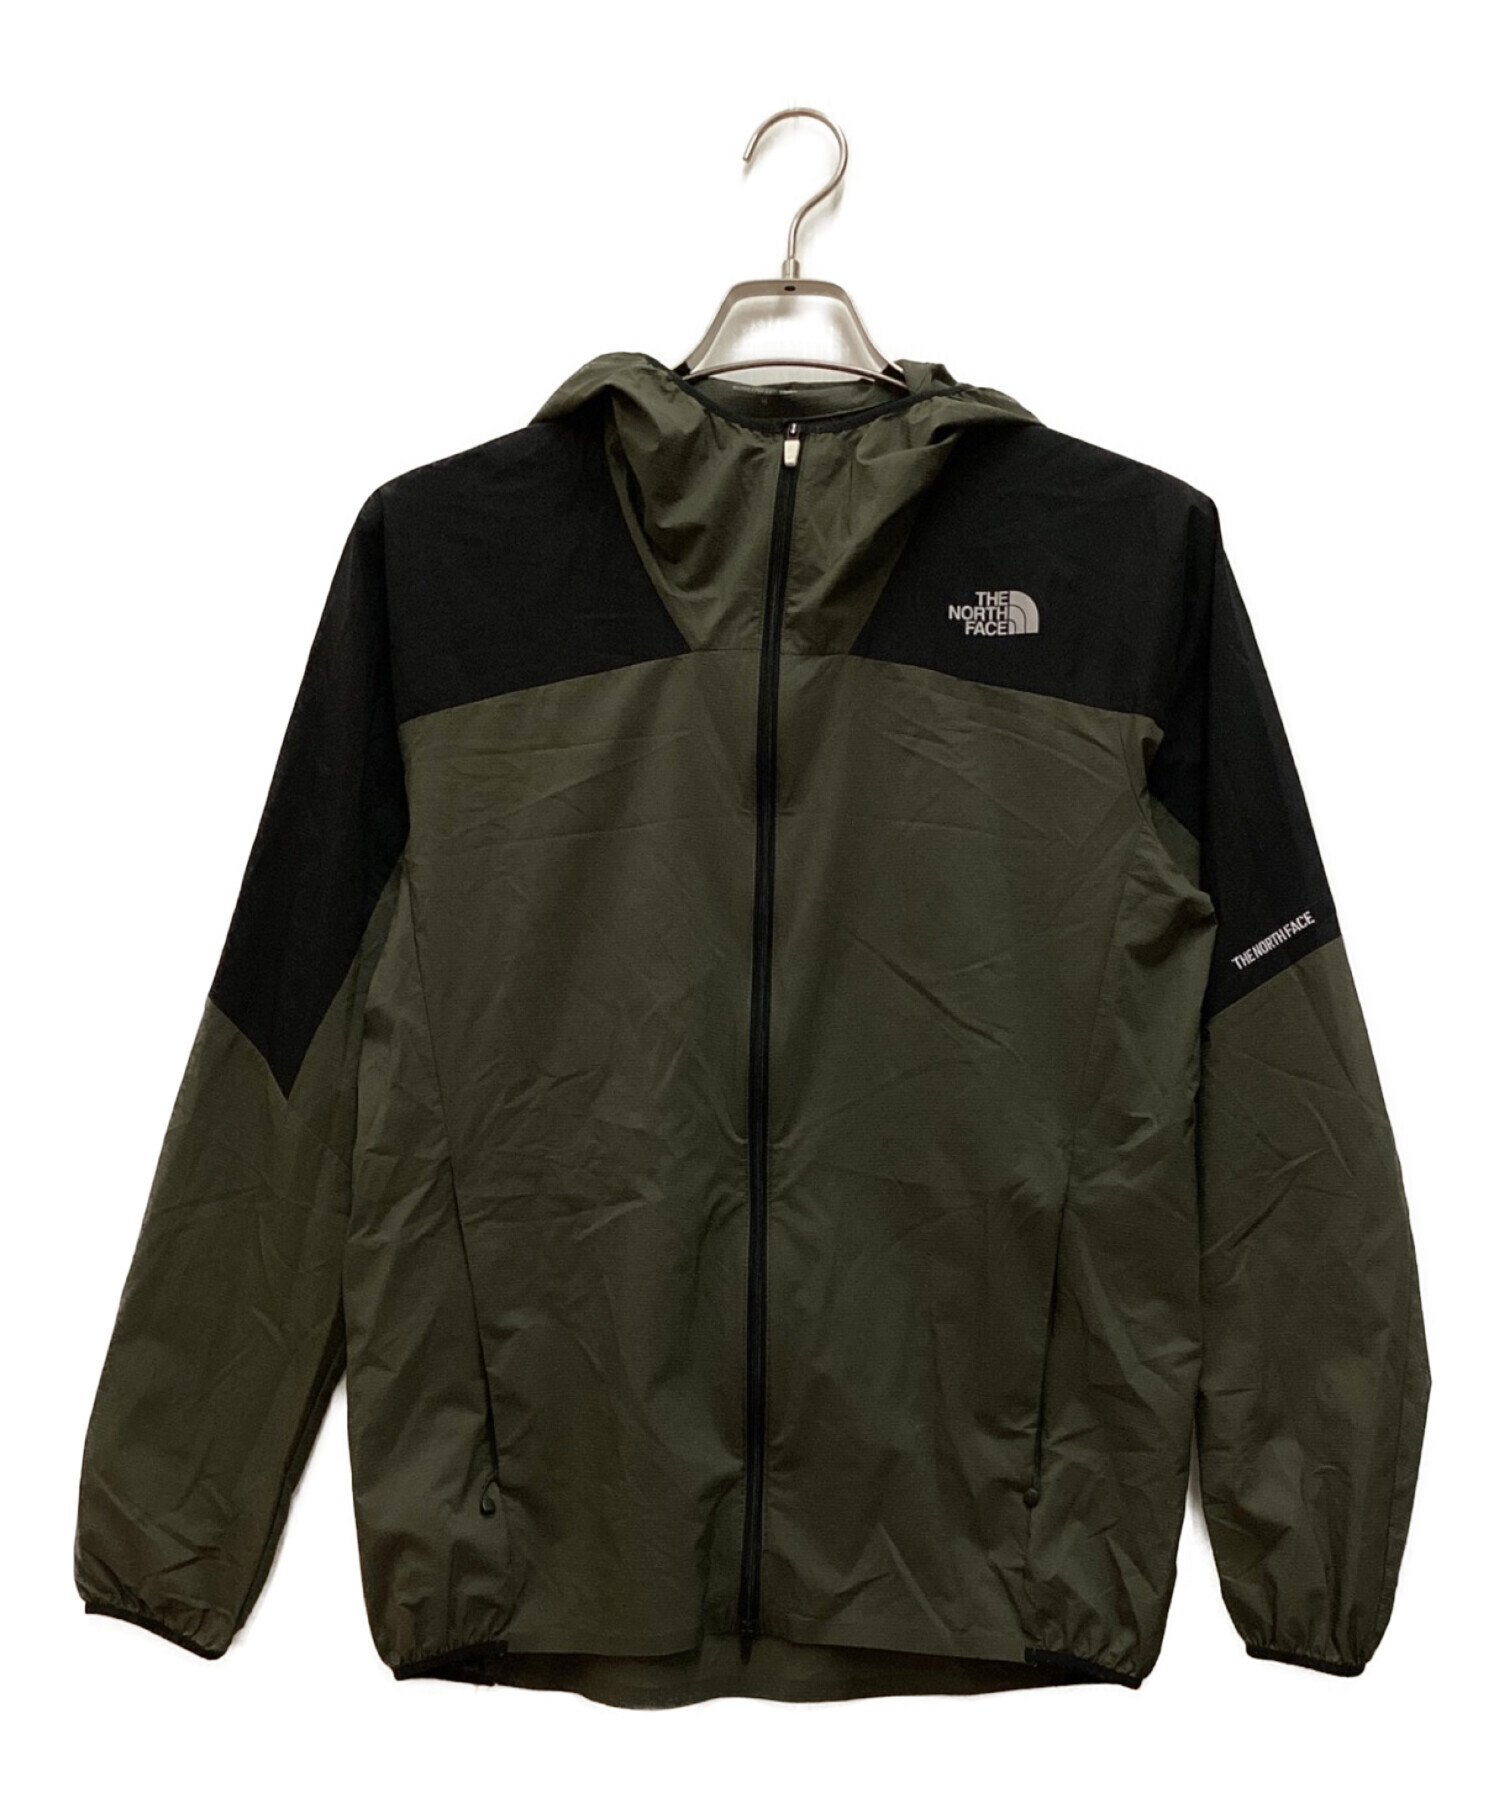 THE NORTH FACE  Swallowtail Hoodie 新品未使用